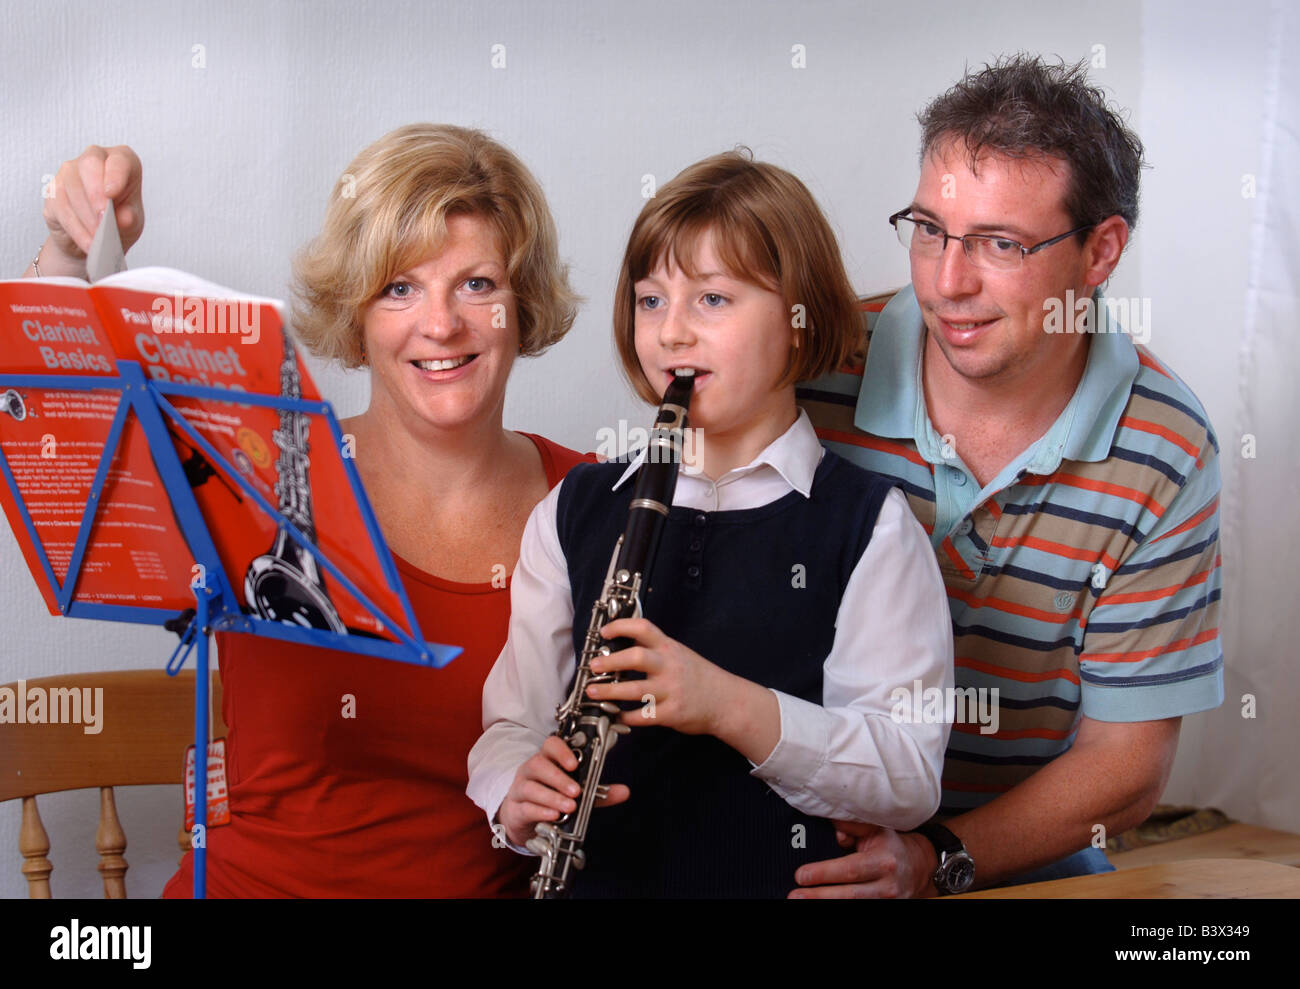 A YOUNG SCHOOLGIRL PRACTICES THE CLARINET HELPED BY HER PARENTS UK Stock Photo